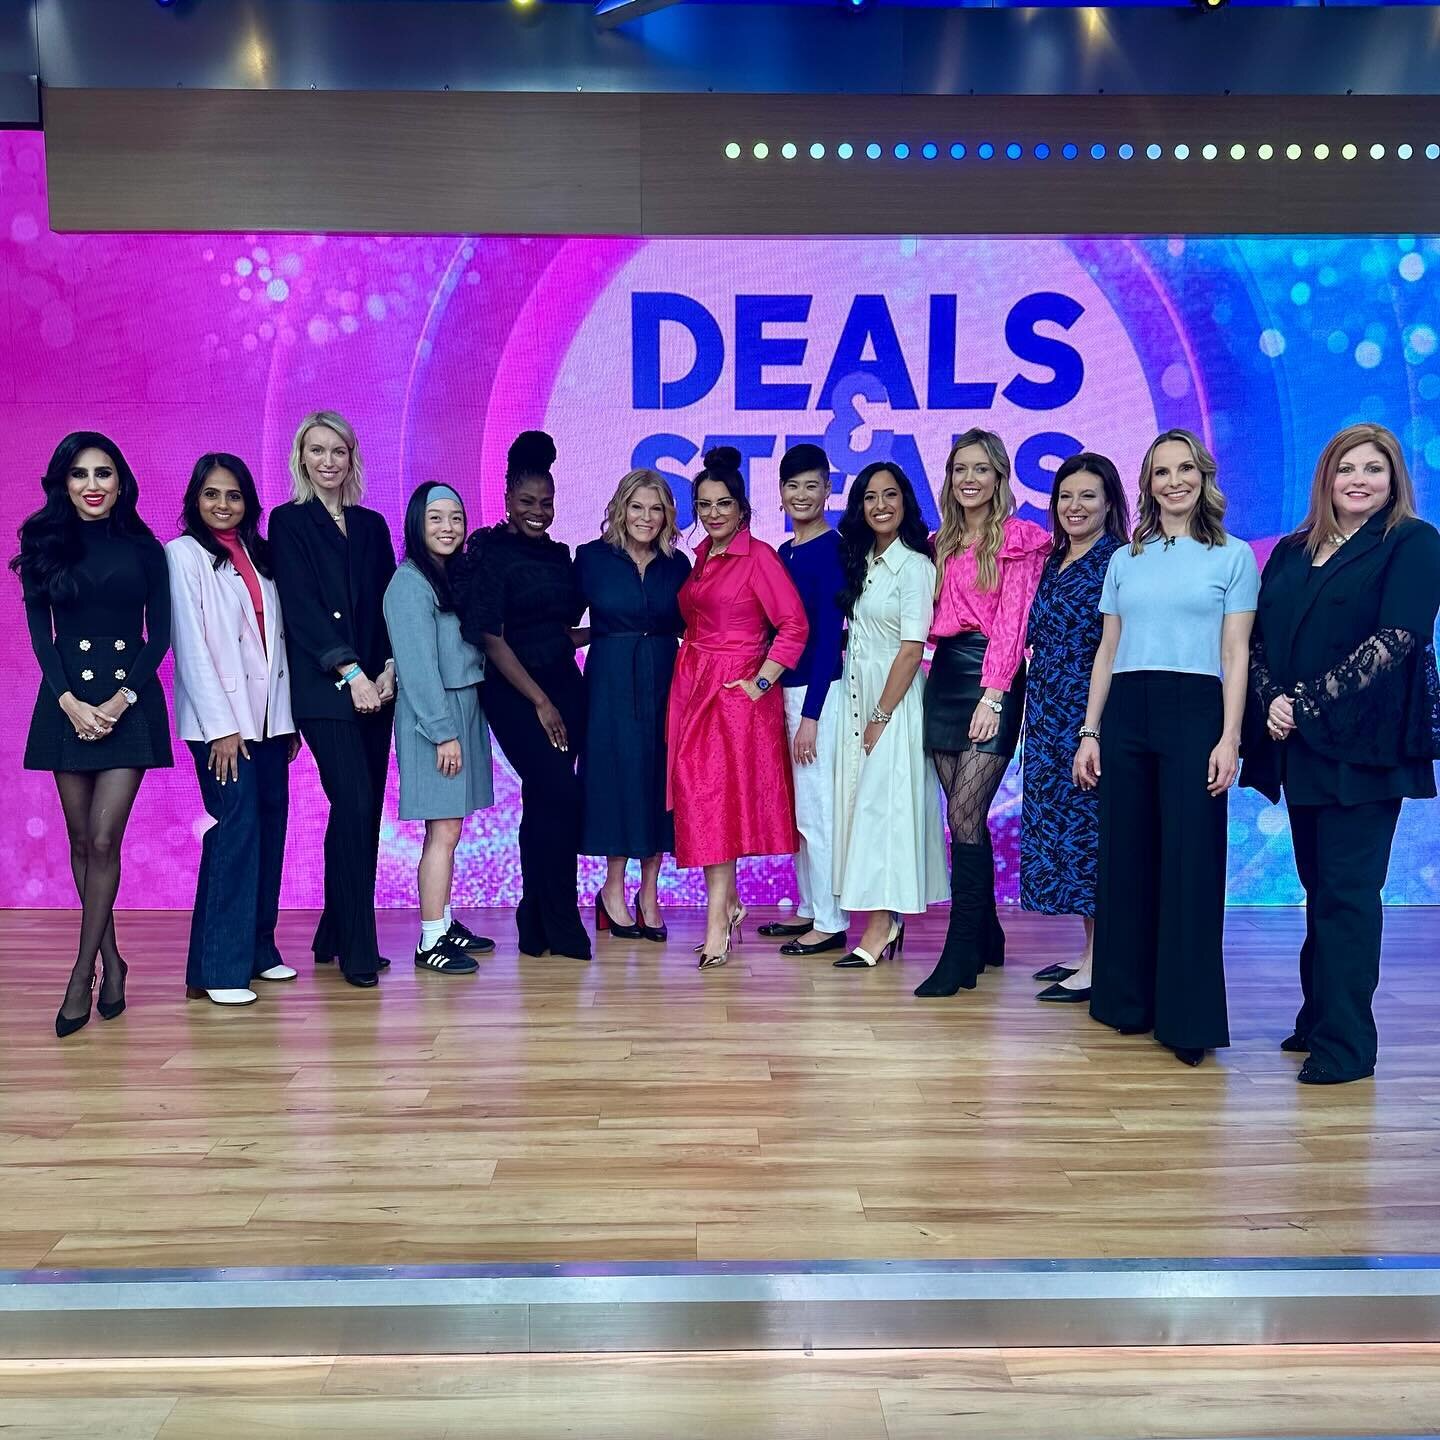 Dream morning at GMA celebrating 12 dynamic women whose passions have led to the products we know and love. 

Glowy makeup, glam lashes, better sleep, insane olive oils, basketballs to get everyone on the court, jeweled glassware, bright decor, bras 